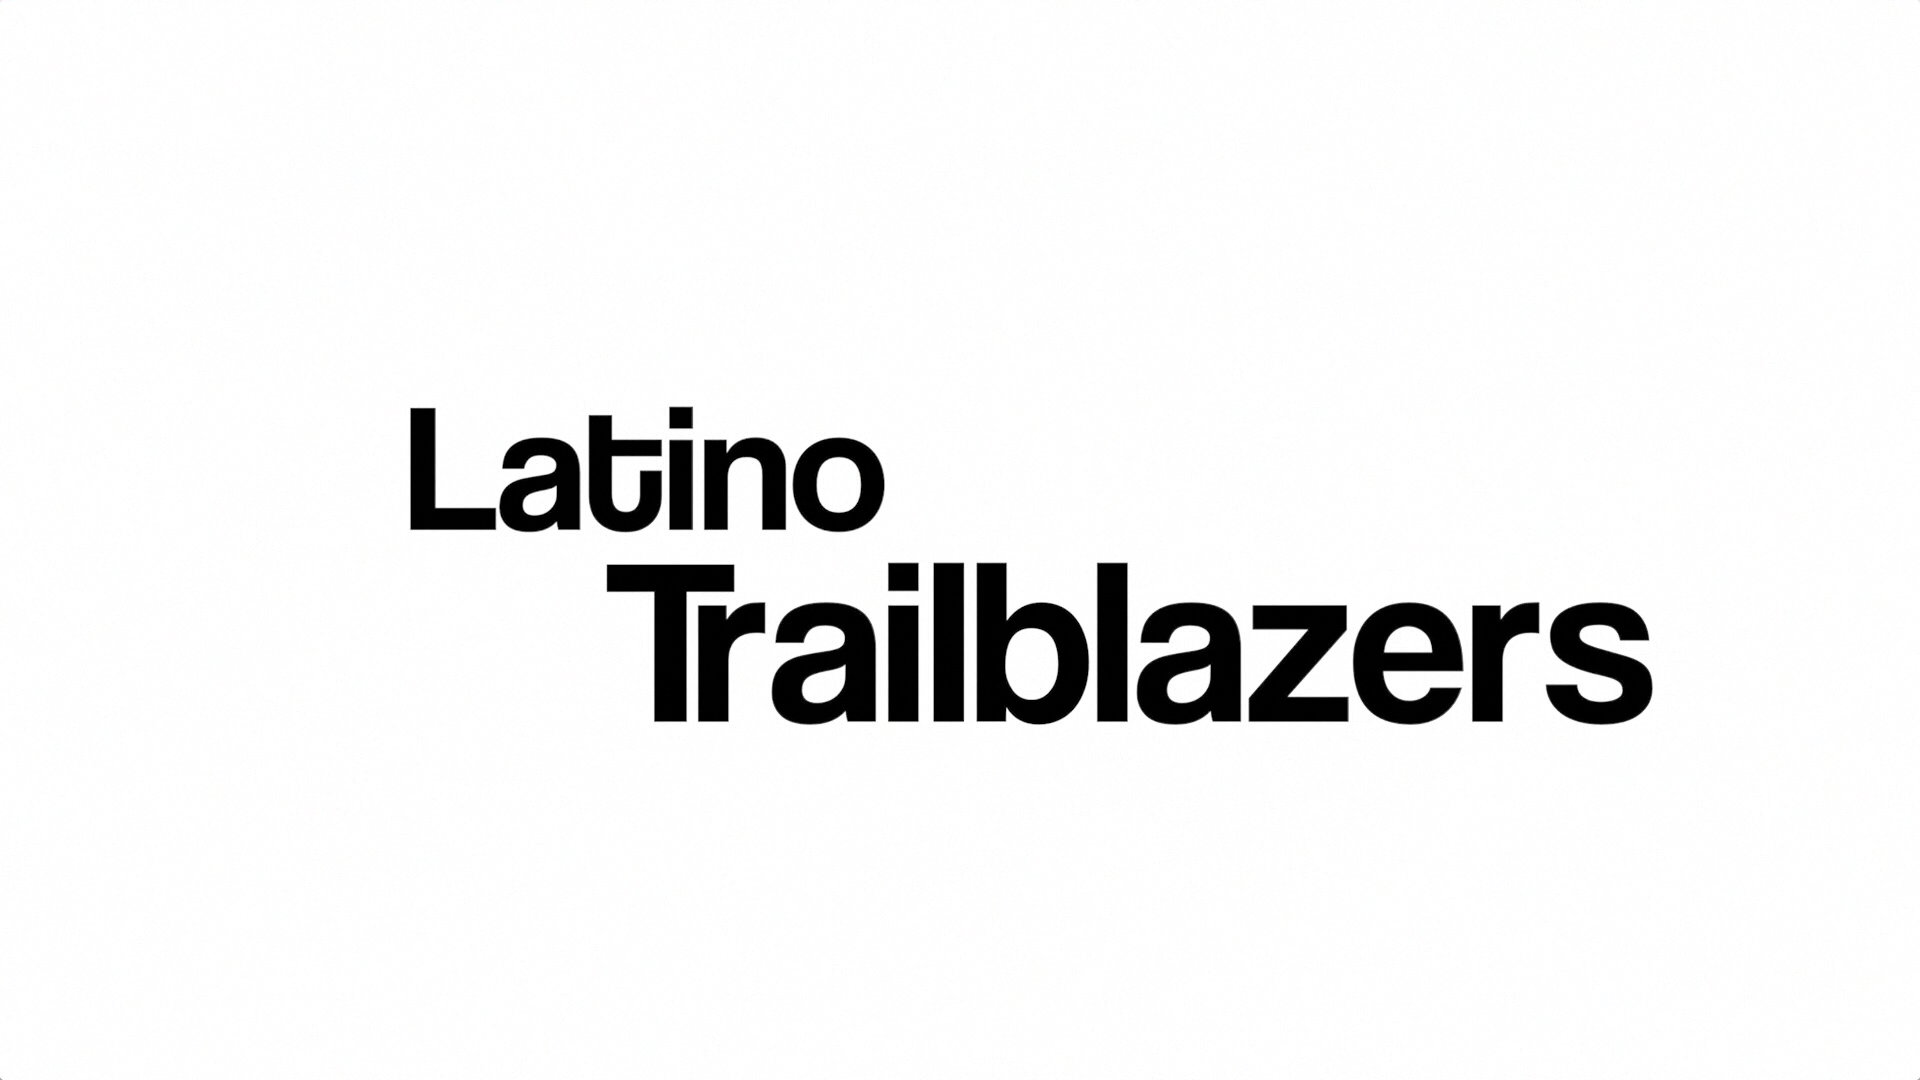 (Inglés) DigiBunch Recognizes 2013 Class of Latino Trailblazers with Unique Online Video Series during Hispanic Heritage Month